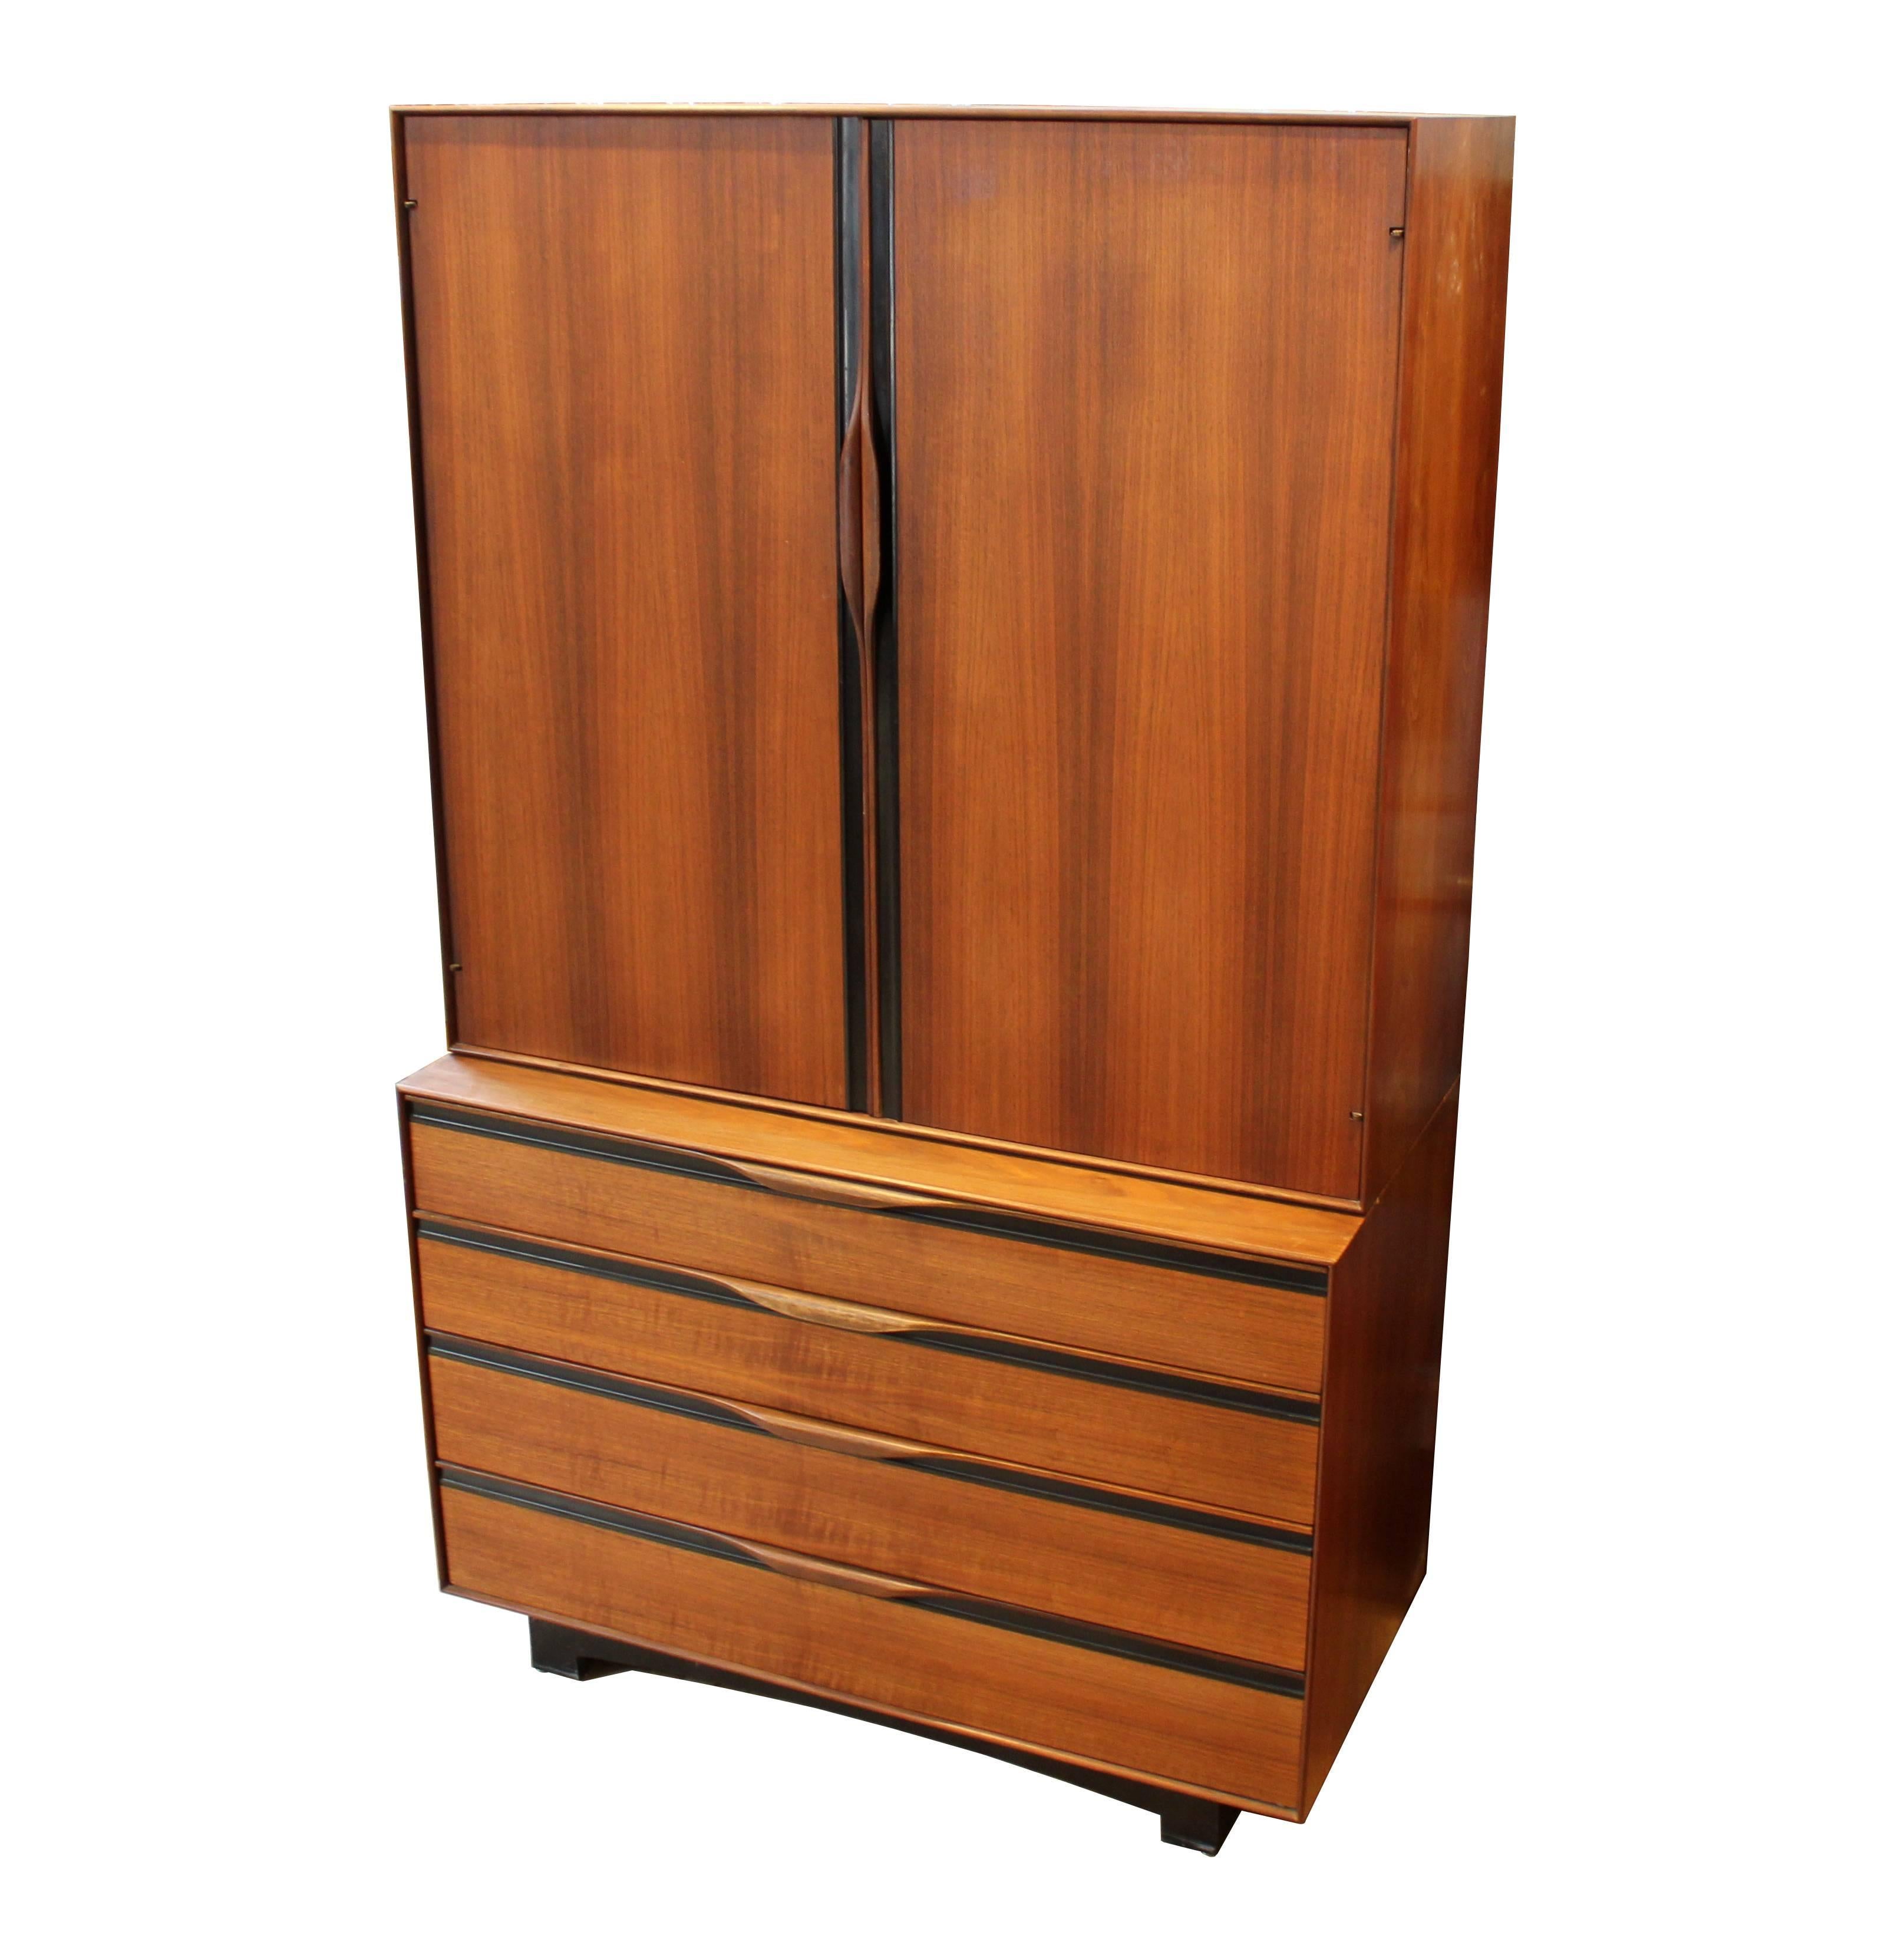 1960s walnut gentleman's chest by John Kapel for Glenn of California. The piece is composed of a lower dresser and an upper cabinet with three drawers, adjustable shelves, and a mirror which swings out for more storage. An elegant and practical